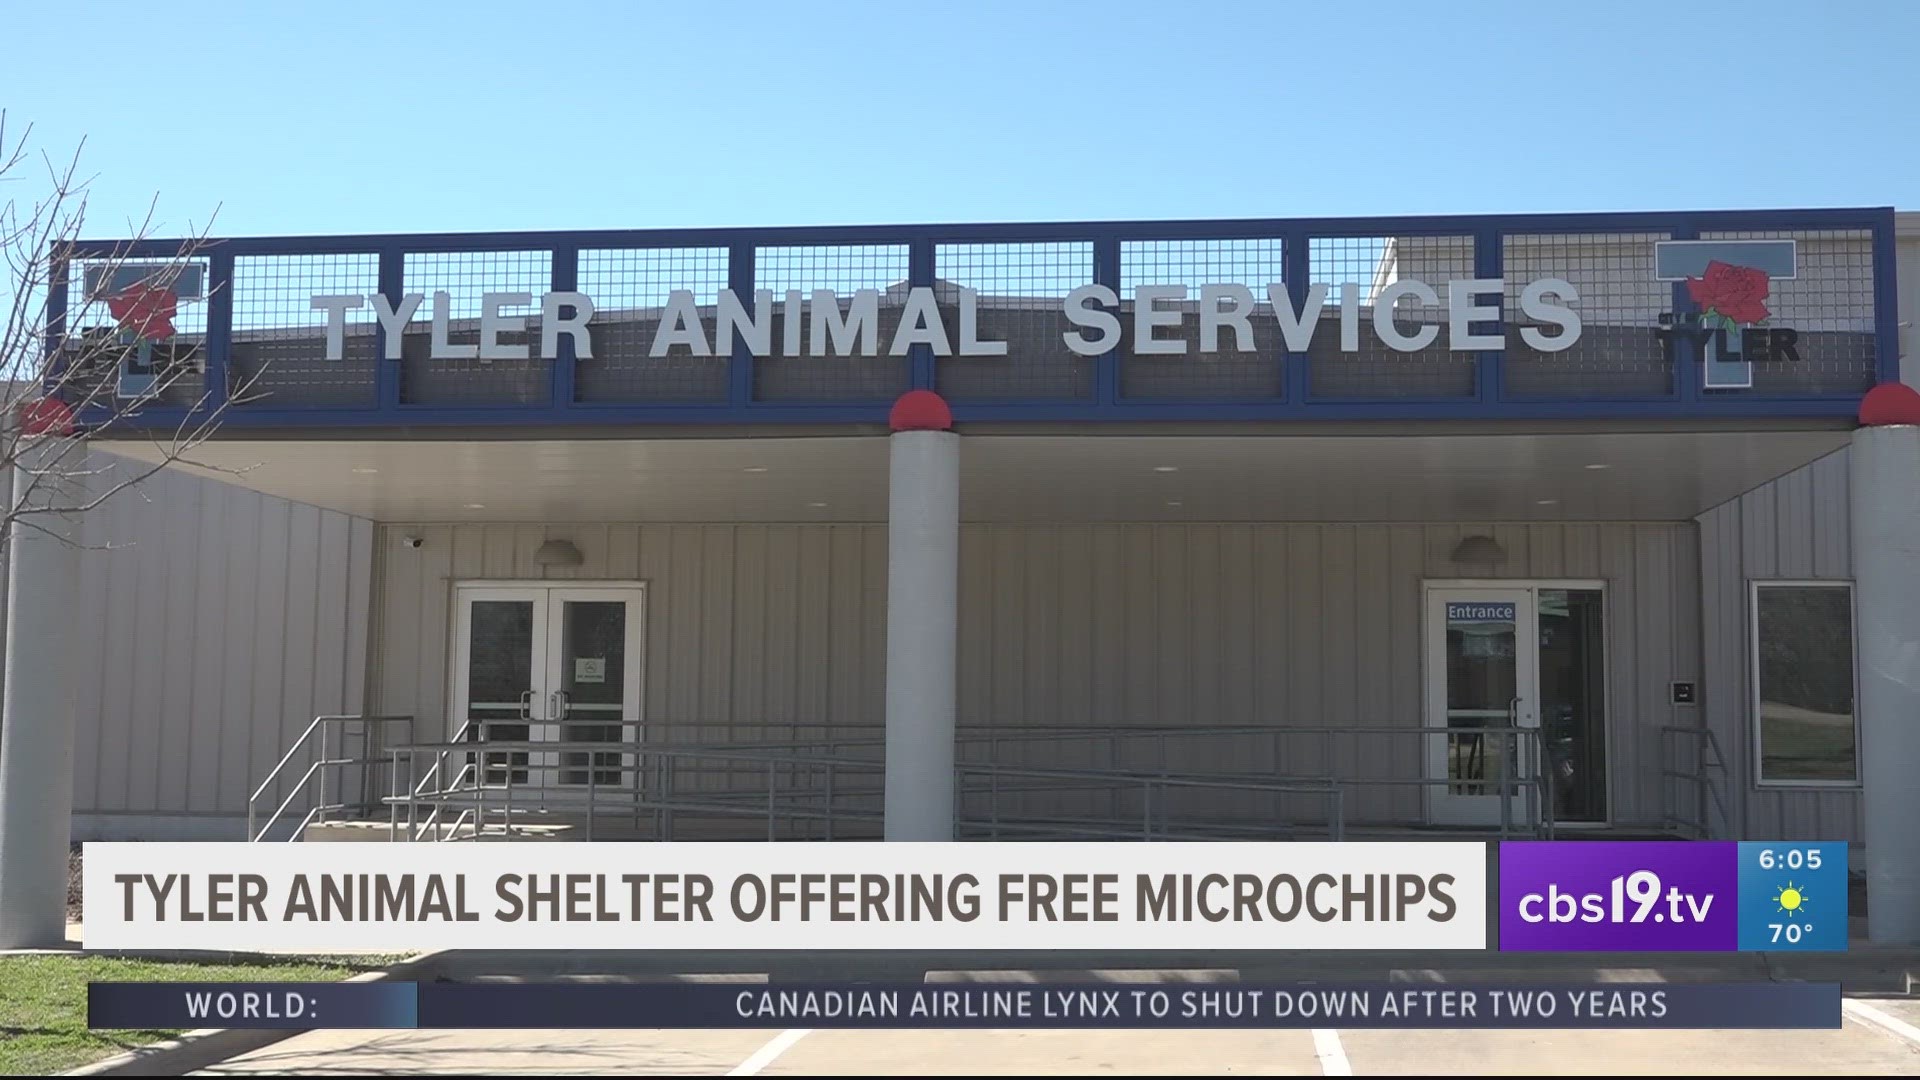 Tyler Animal Shelter offering 1,000 free microchips to all pets